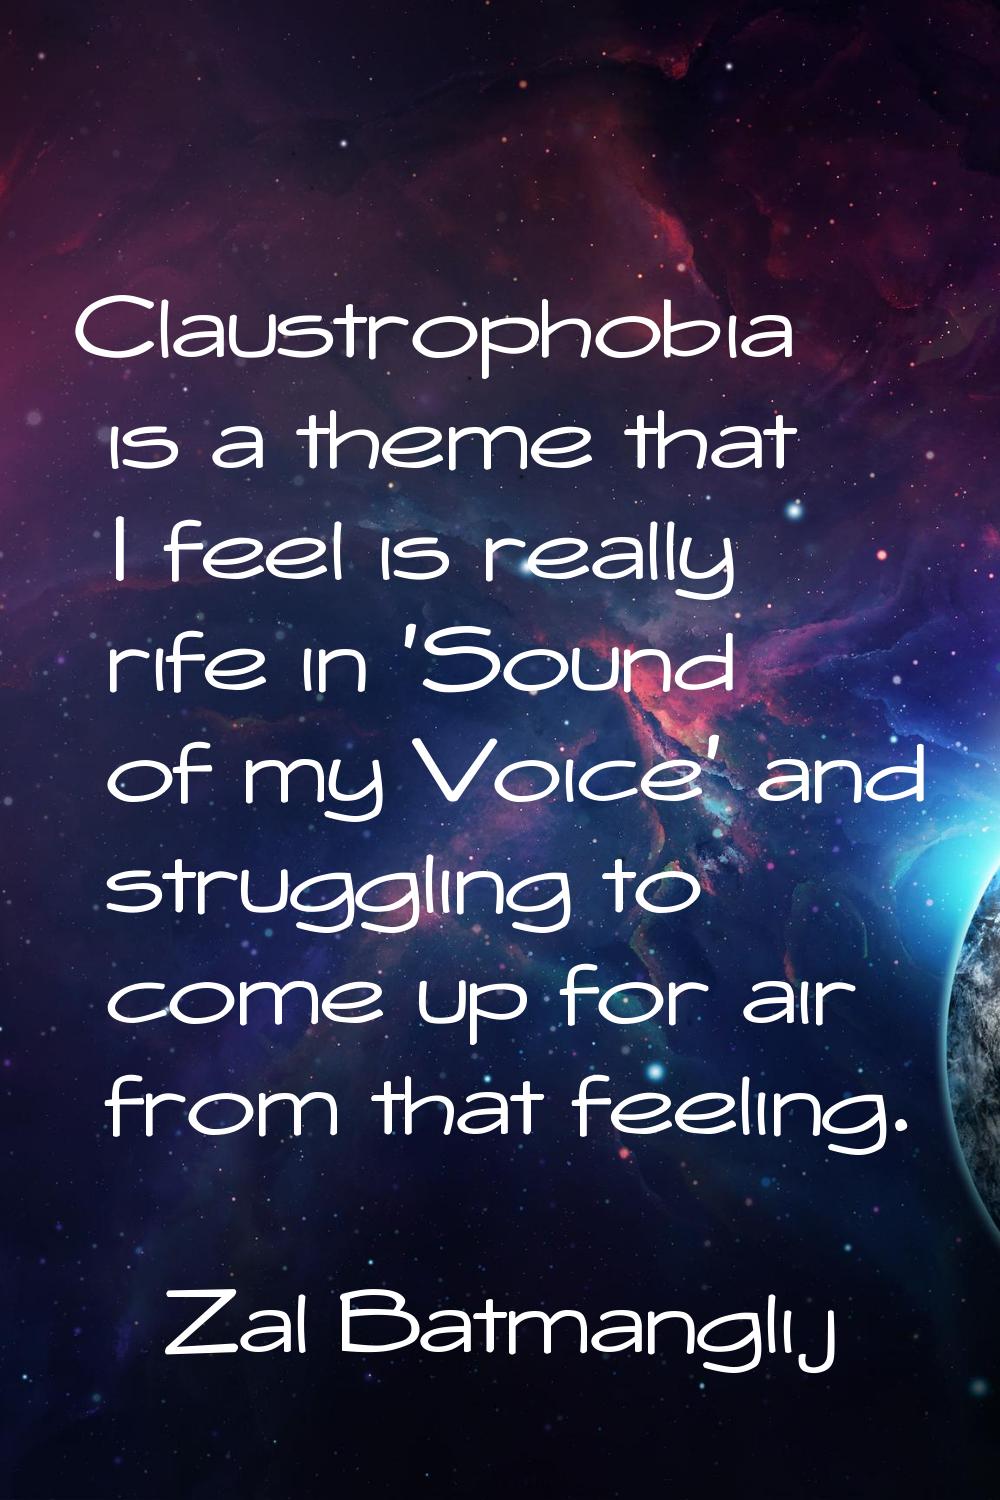 Claustrophobia is a theme that I feel is really rife in 'Sound of my Voice' and struggling to come 